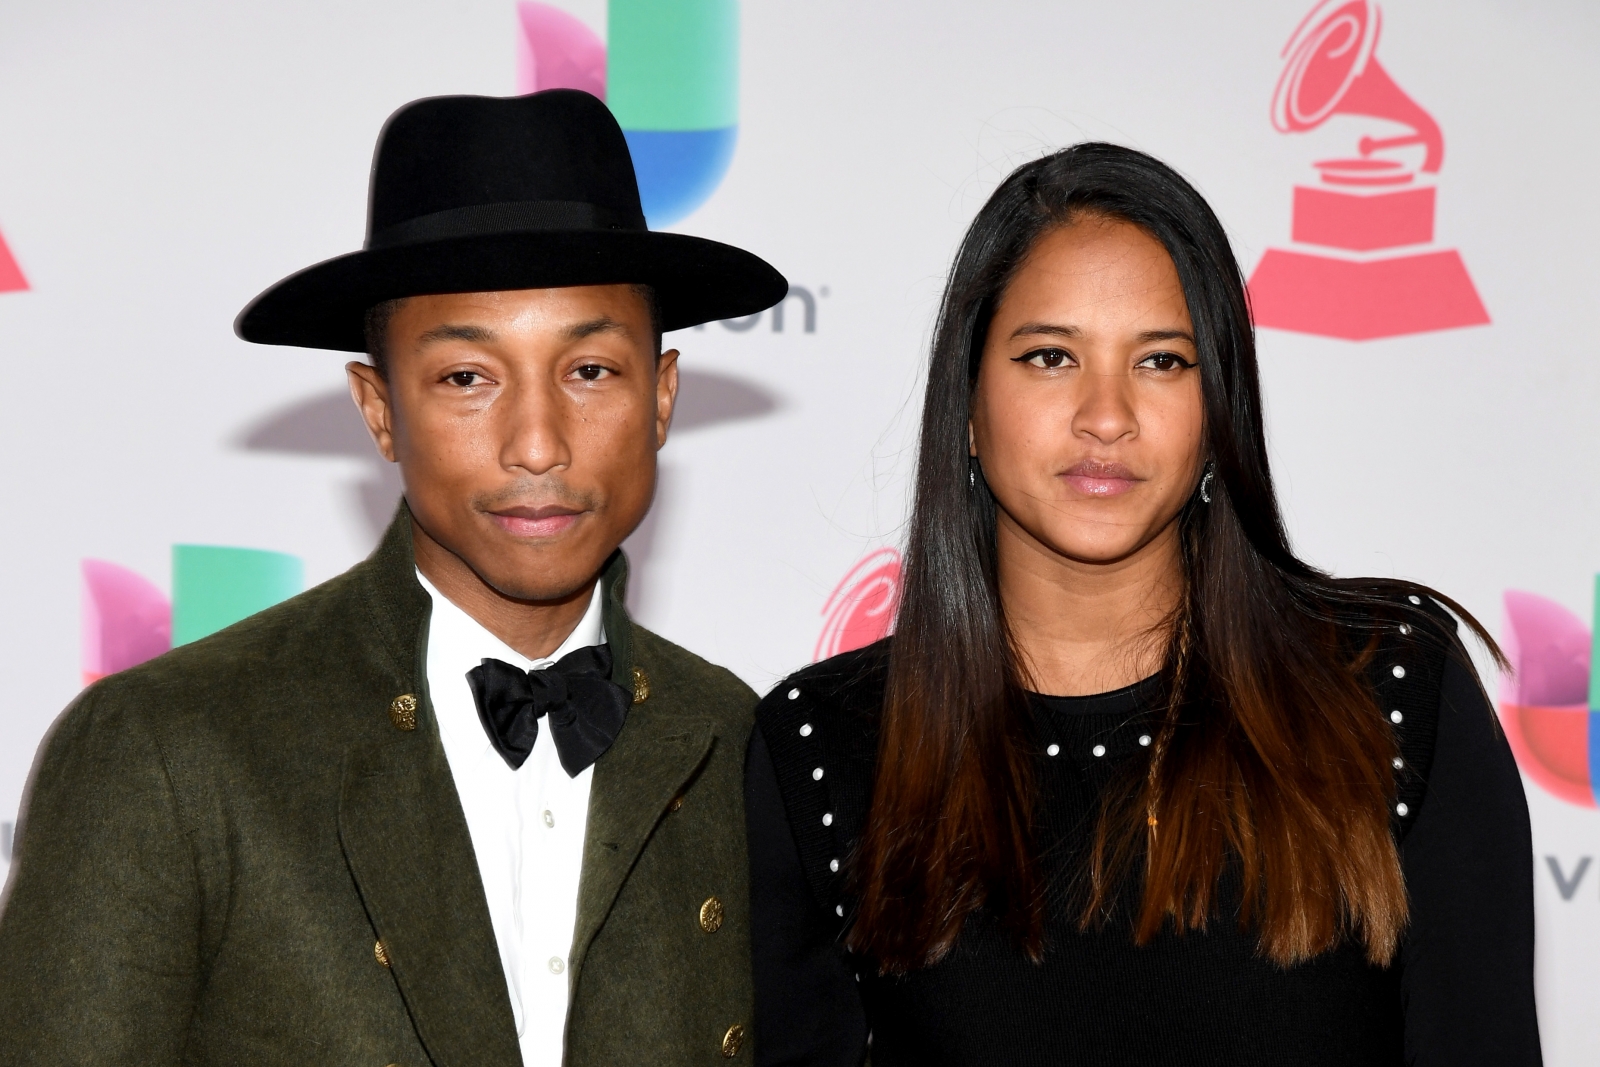 Pharrell Williams becomes a father to triplets after wife ...